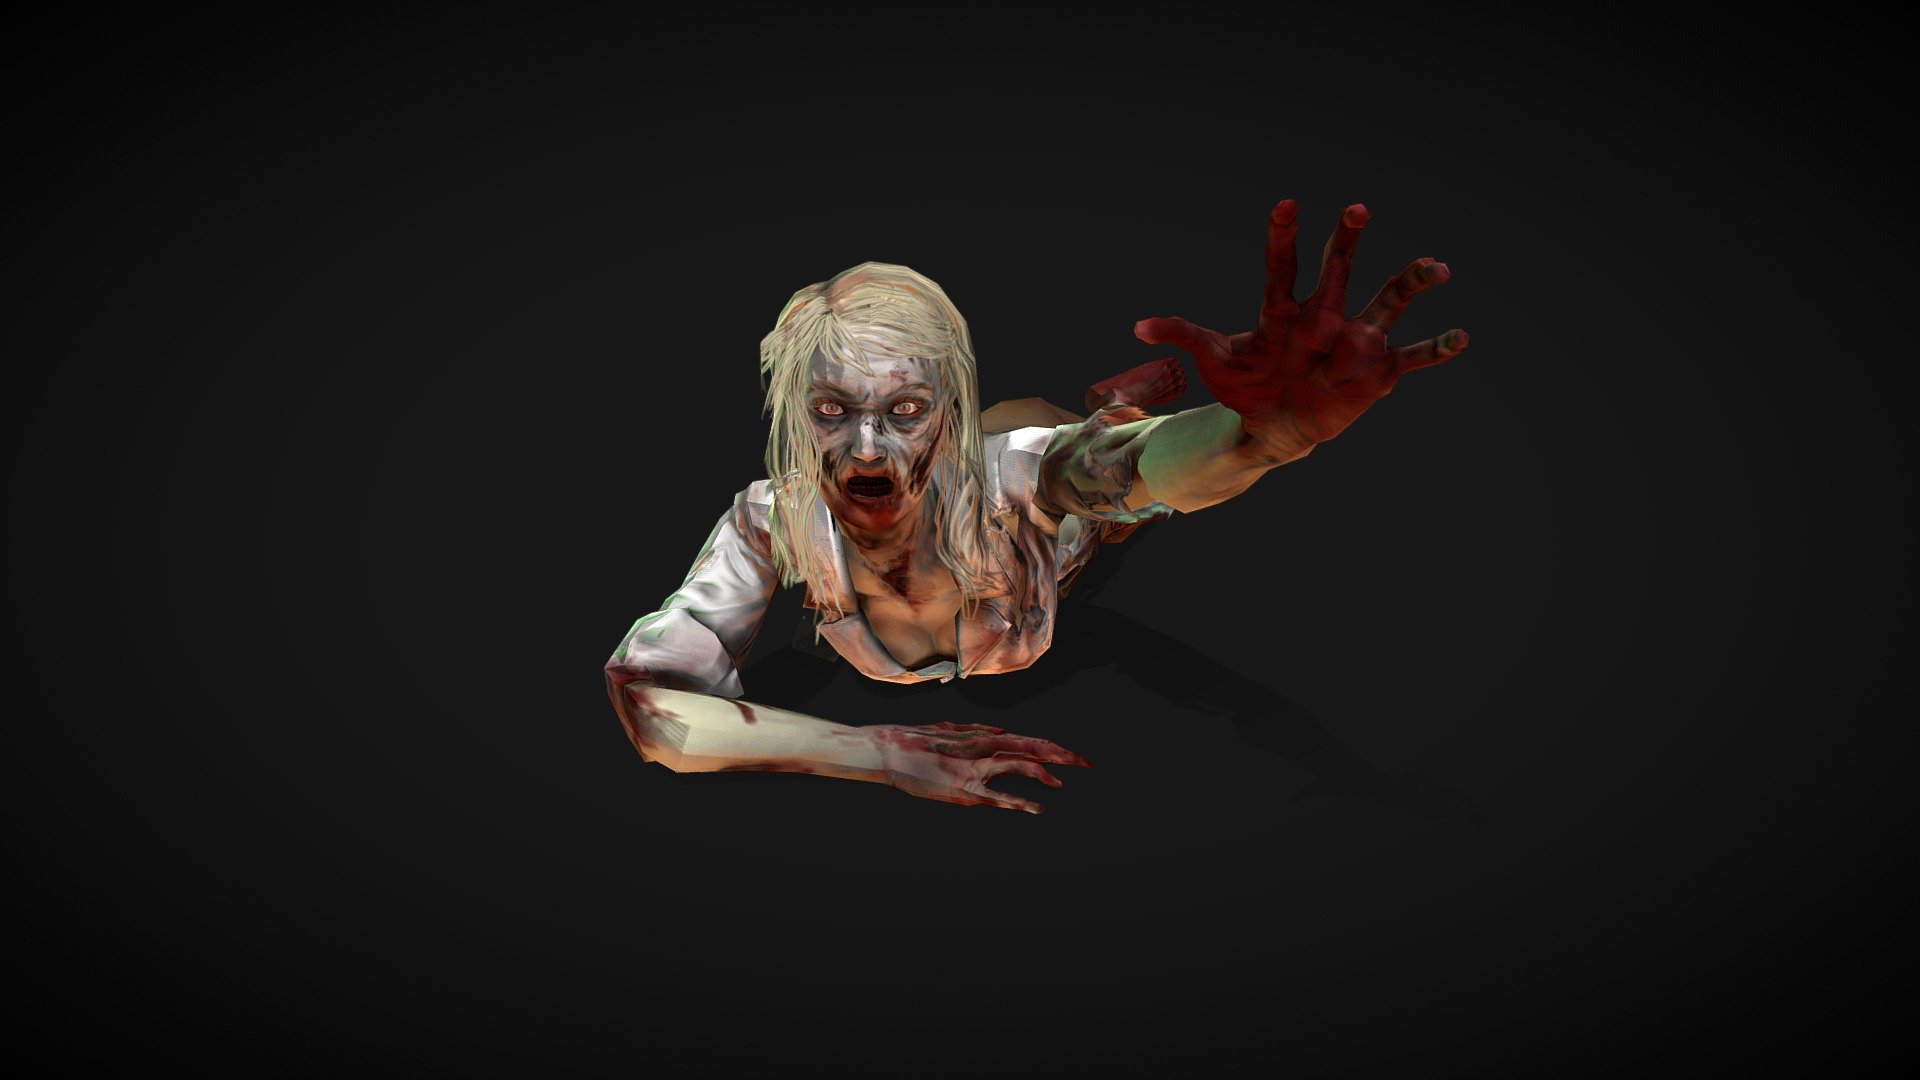 A looping Animation of an Injured Zombie Crawling on the ground.

See this 3D model in action, and more models like it, in this collection of free augmented reality apps:

https://morpheusar.com/ - Animated Injured Zombie Crawling Loop - 3D model by LasquetiSpice 3d model